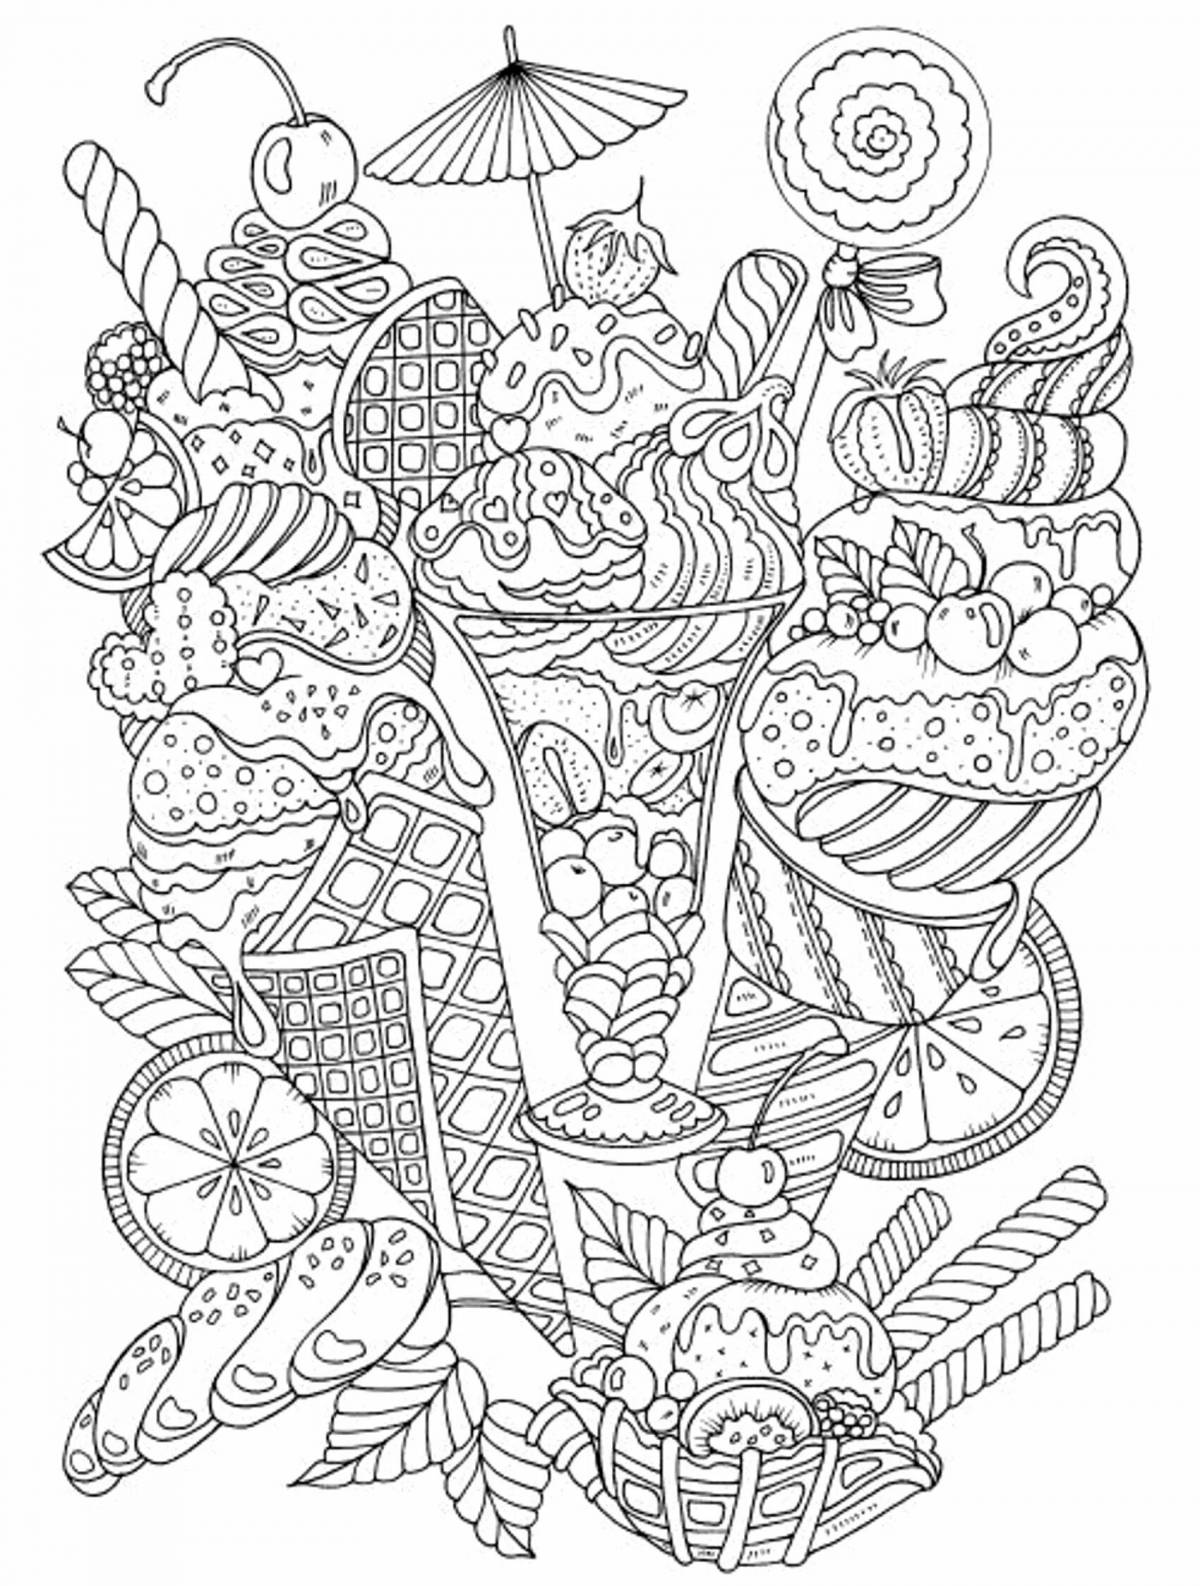 Exciting anti-stress coloring book with ice cream